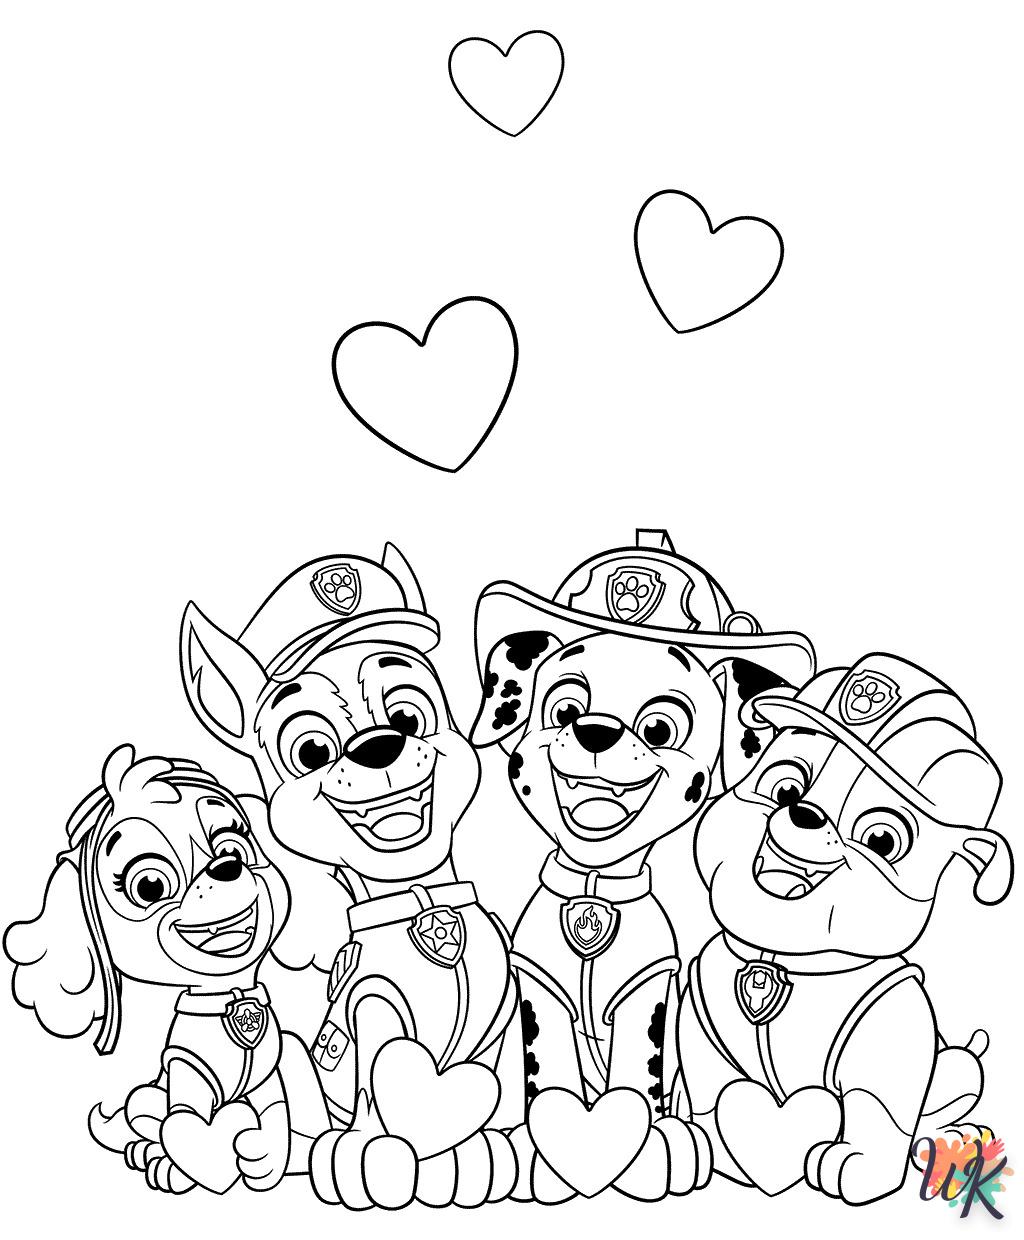 Paw Patrol cards coloring pages